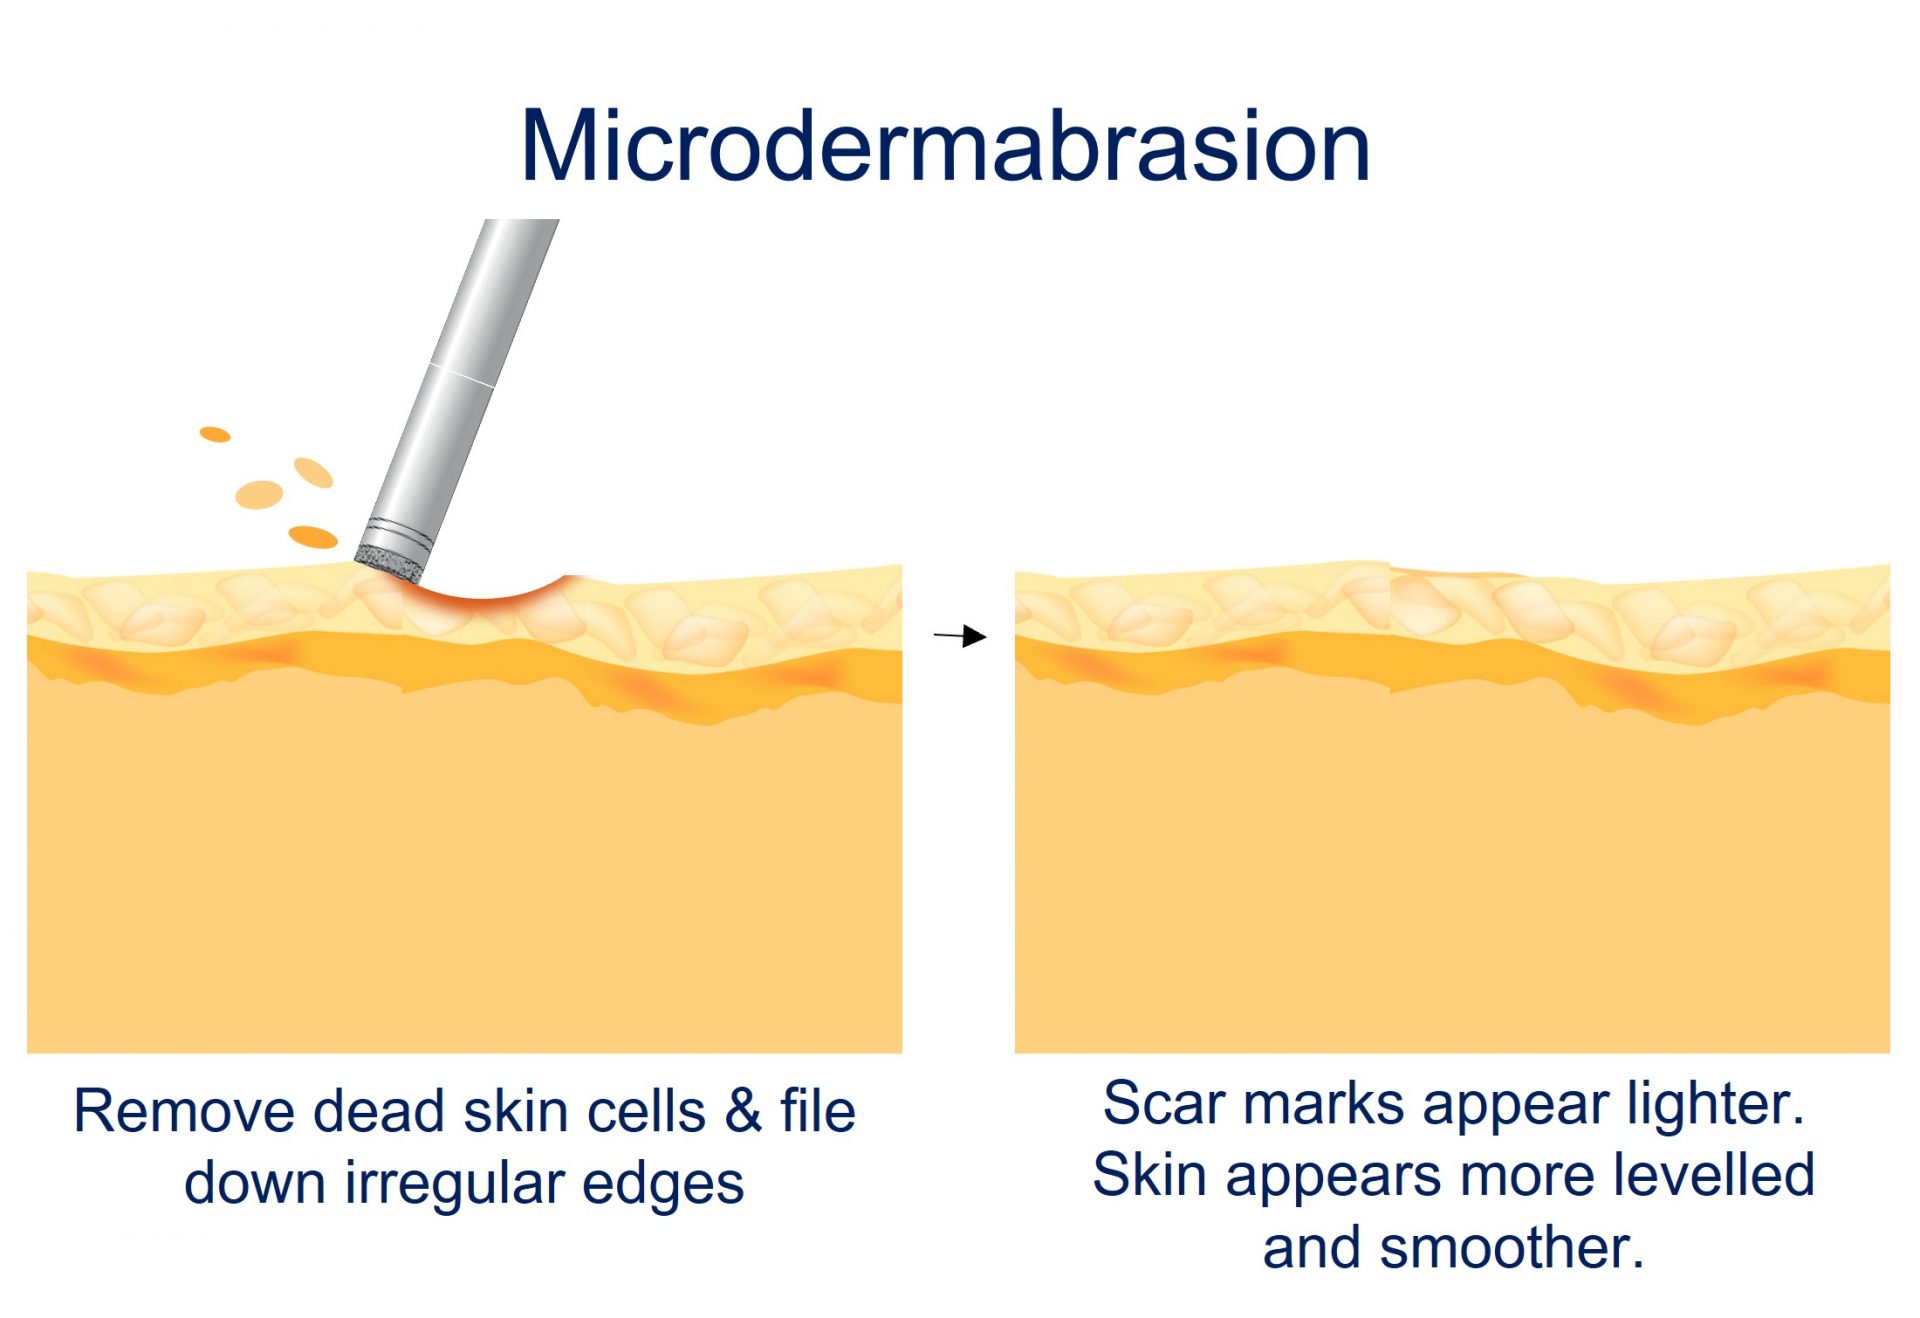 microdermabrasion - how it works